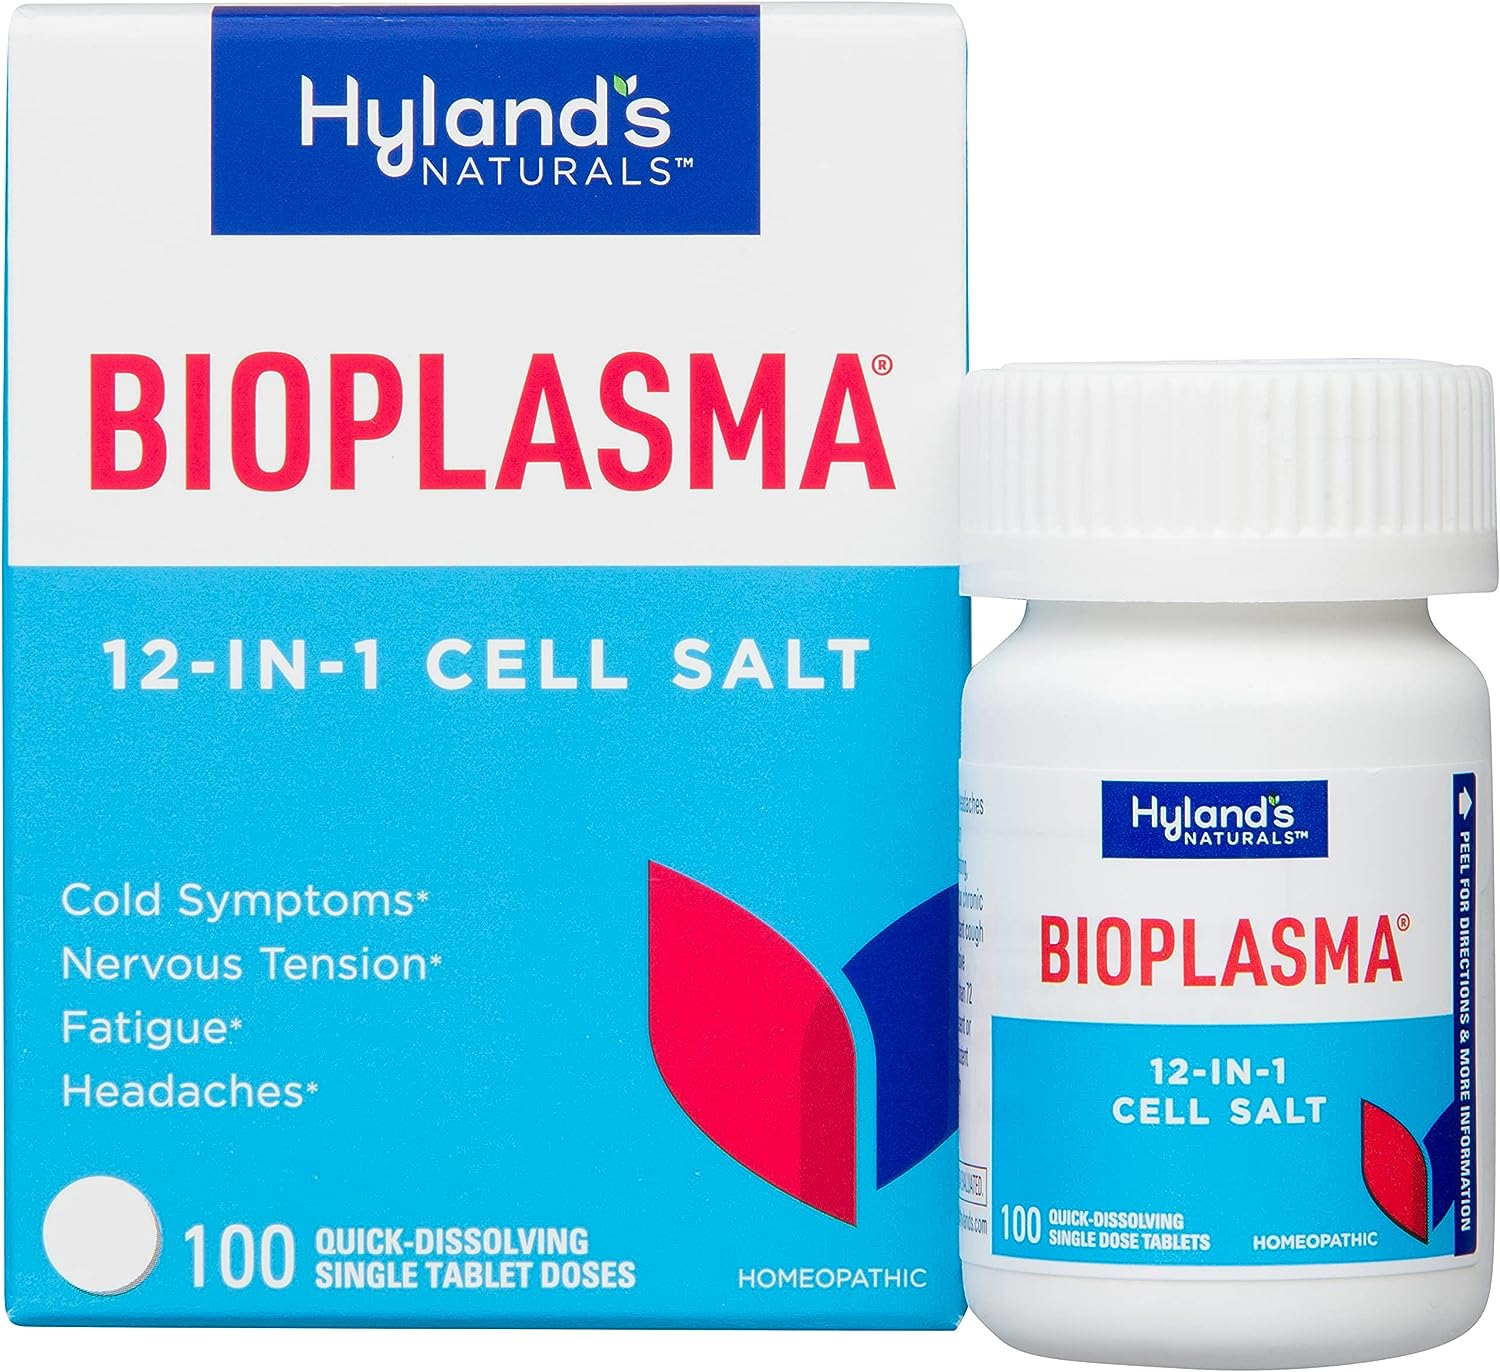 Hyland's Naturals Bioplasma Cell Salts Tablets, Natural Homeopathic Combination of Vital to Cellular Function, For Cold Symptoms, Nervous Tension, Fatigue & Headaches, 100 Count